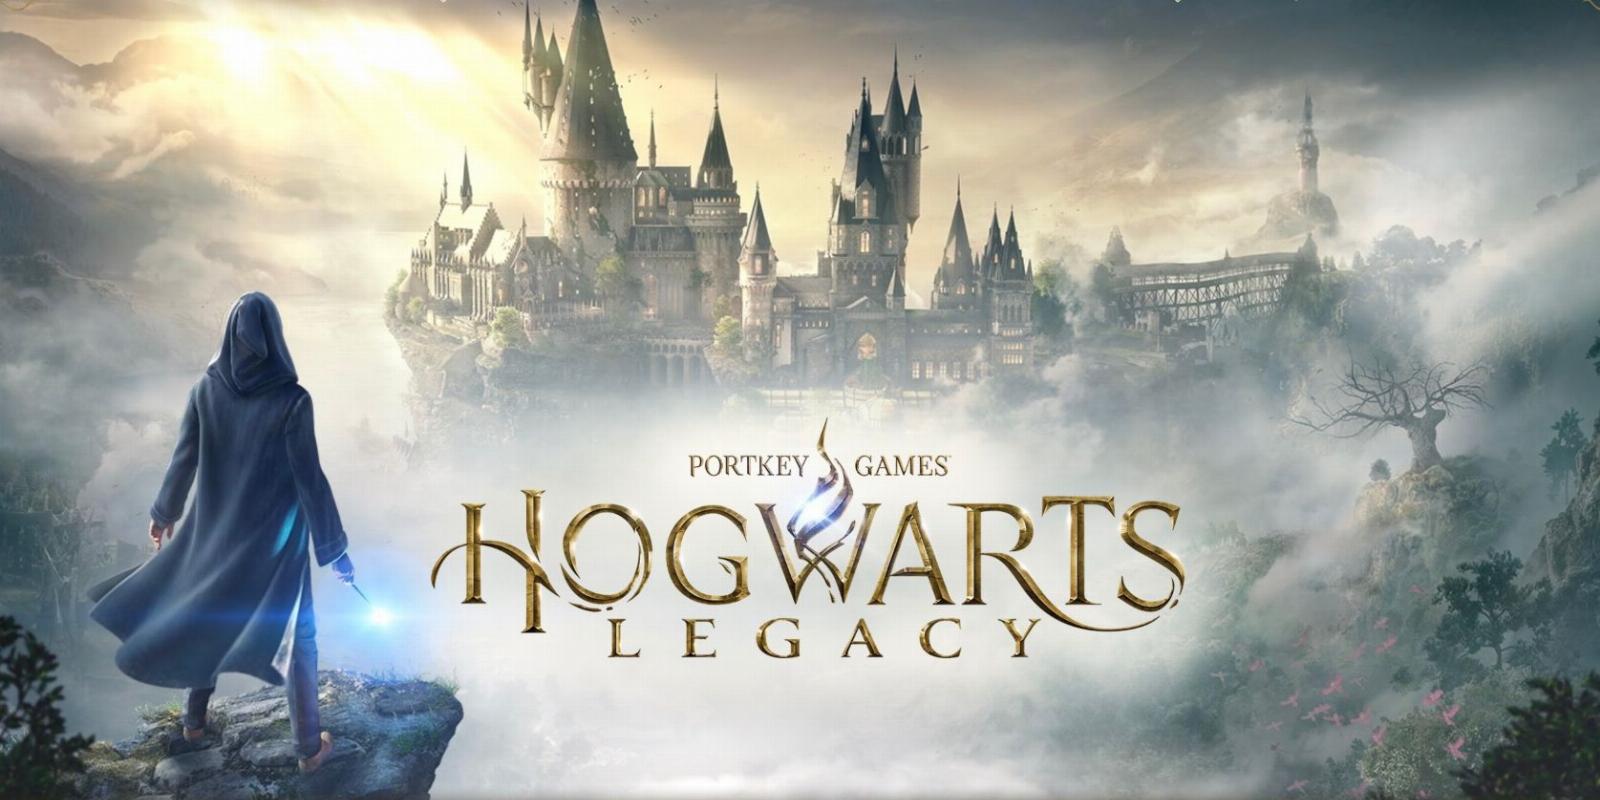 Everything You Need to Know About Hogwarts Legacy Before Buying It